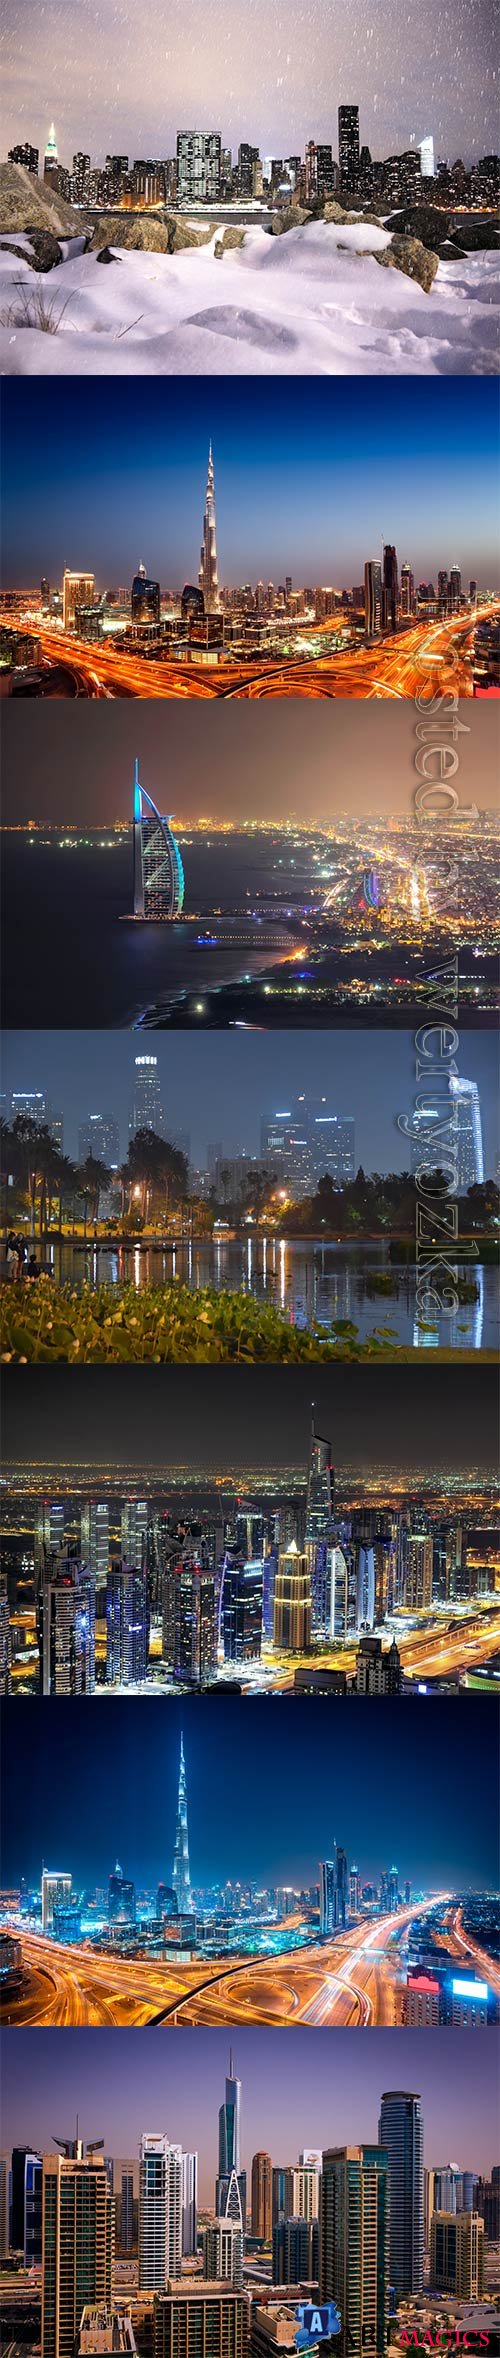 Beautiful backgrounds with night cities